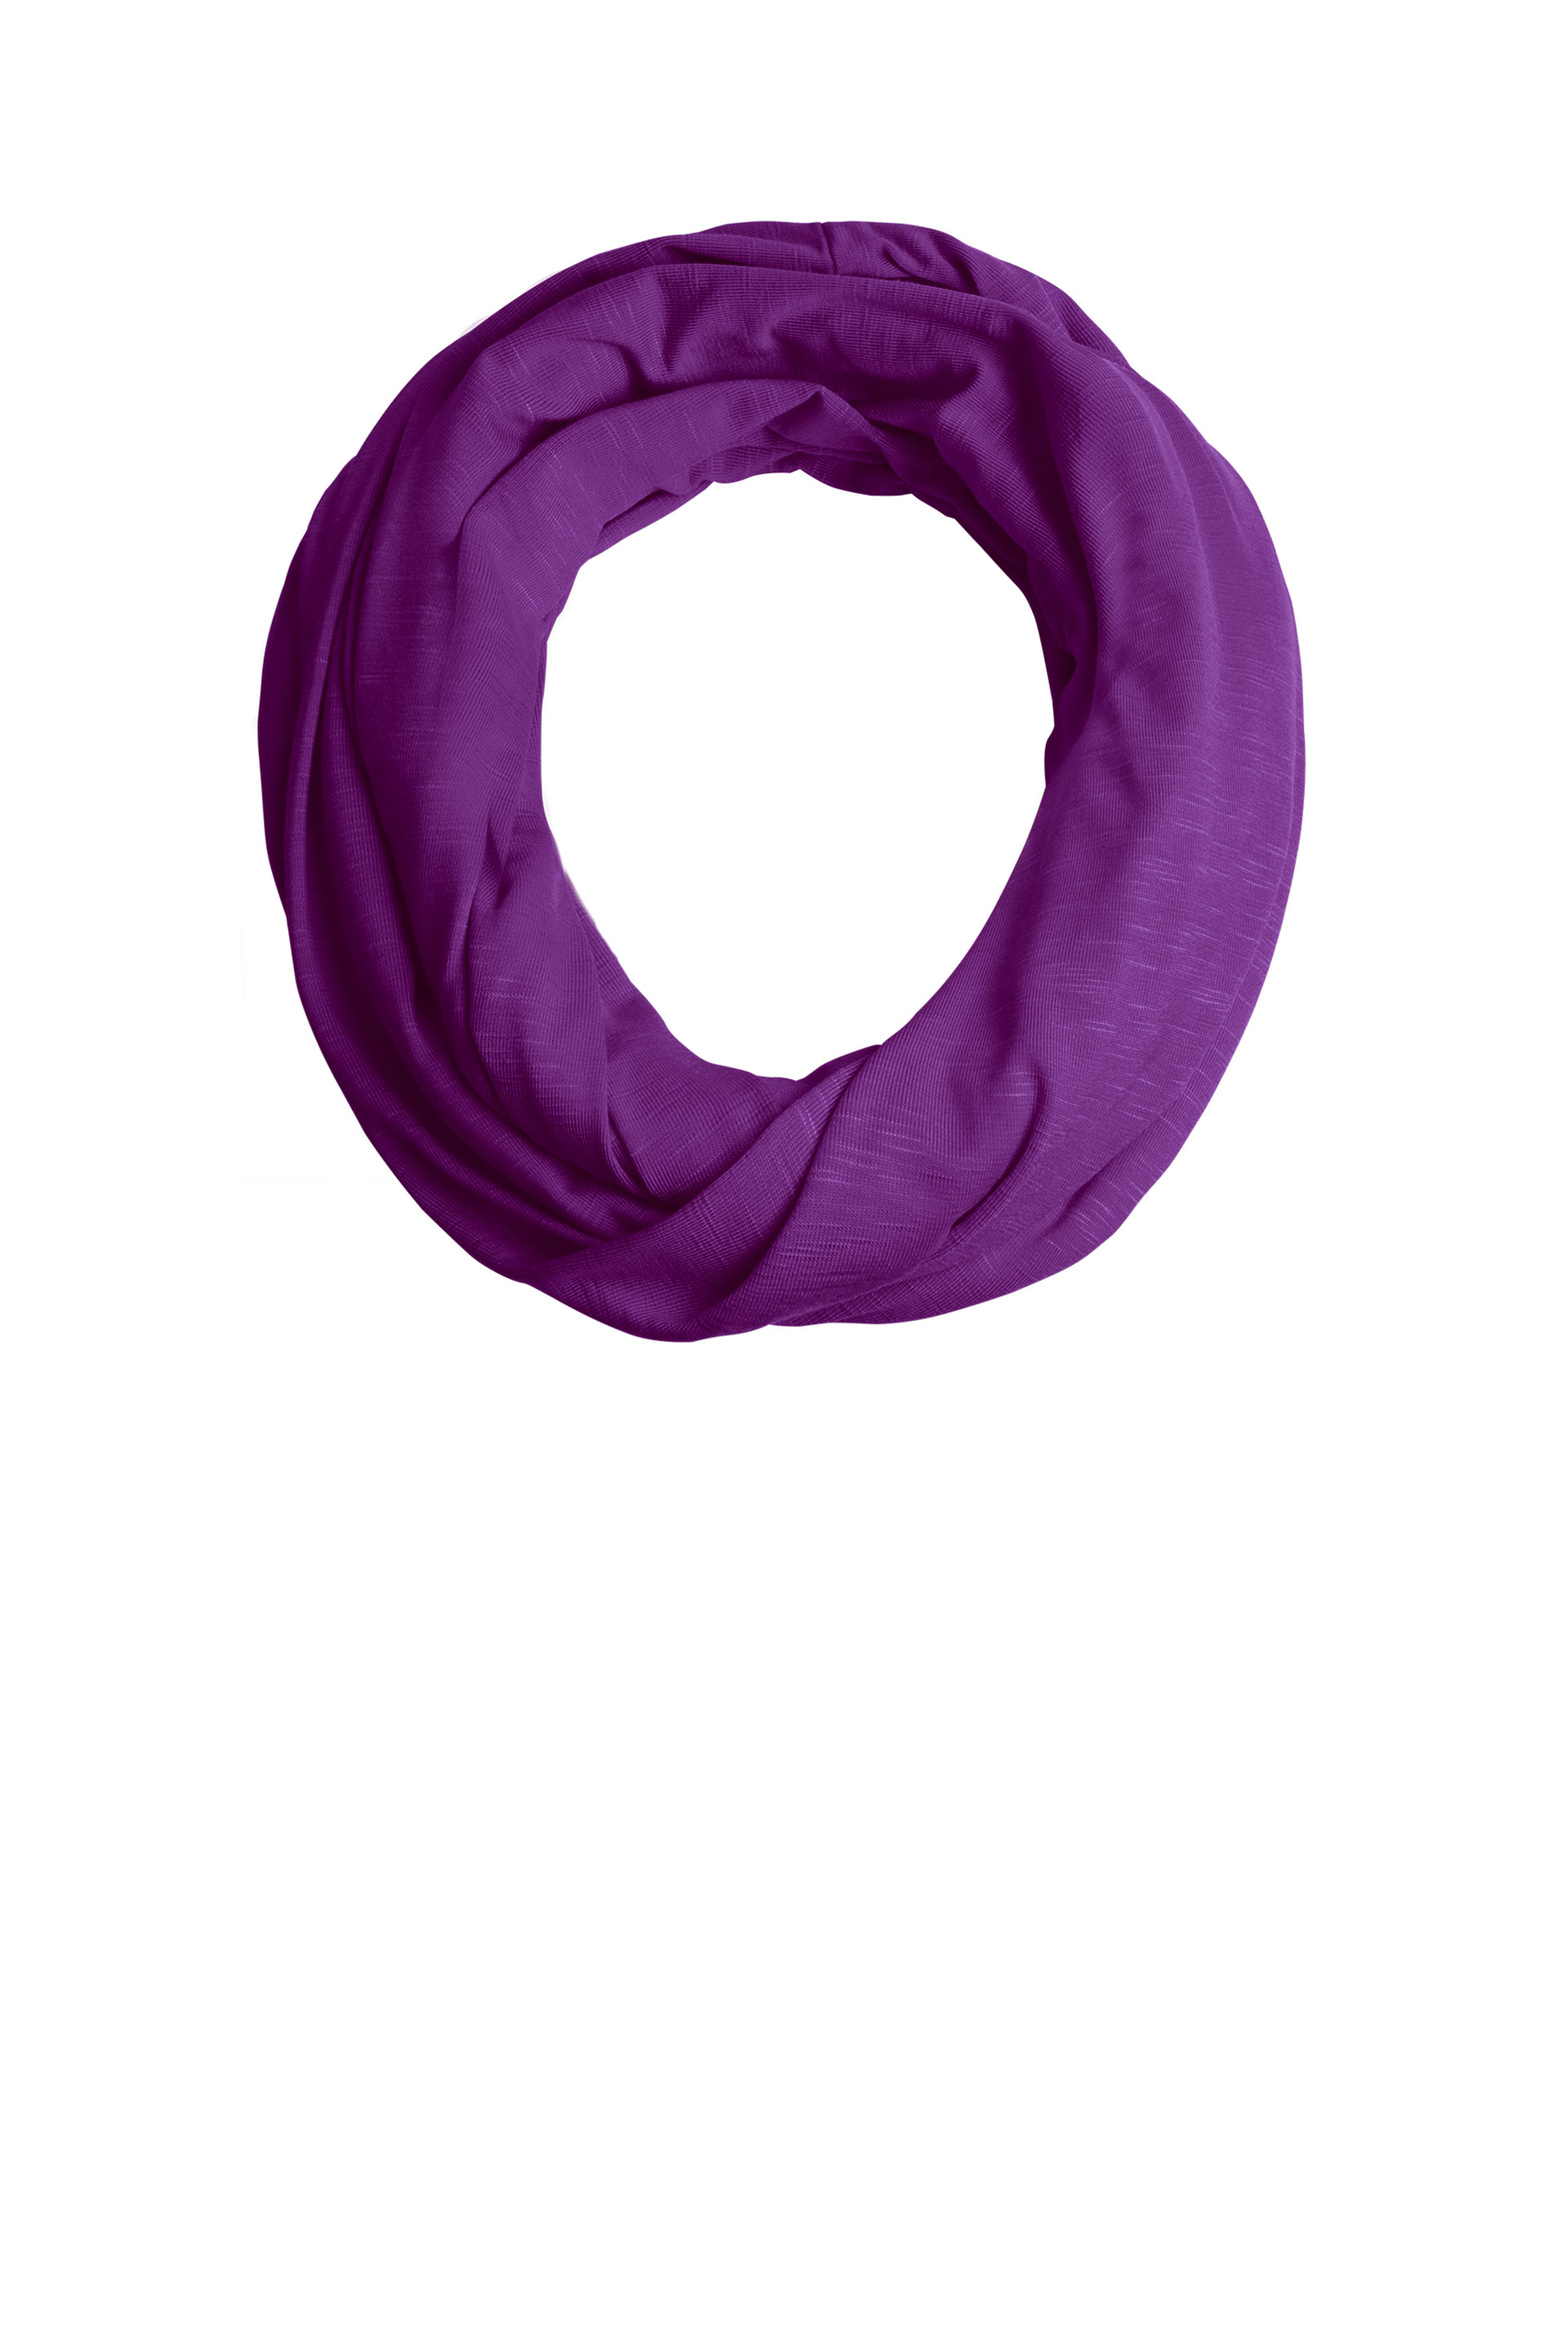 43408_florence_infinity_scarf_pansy_new.jpg